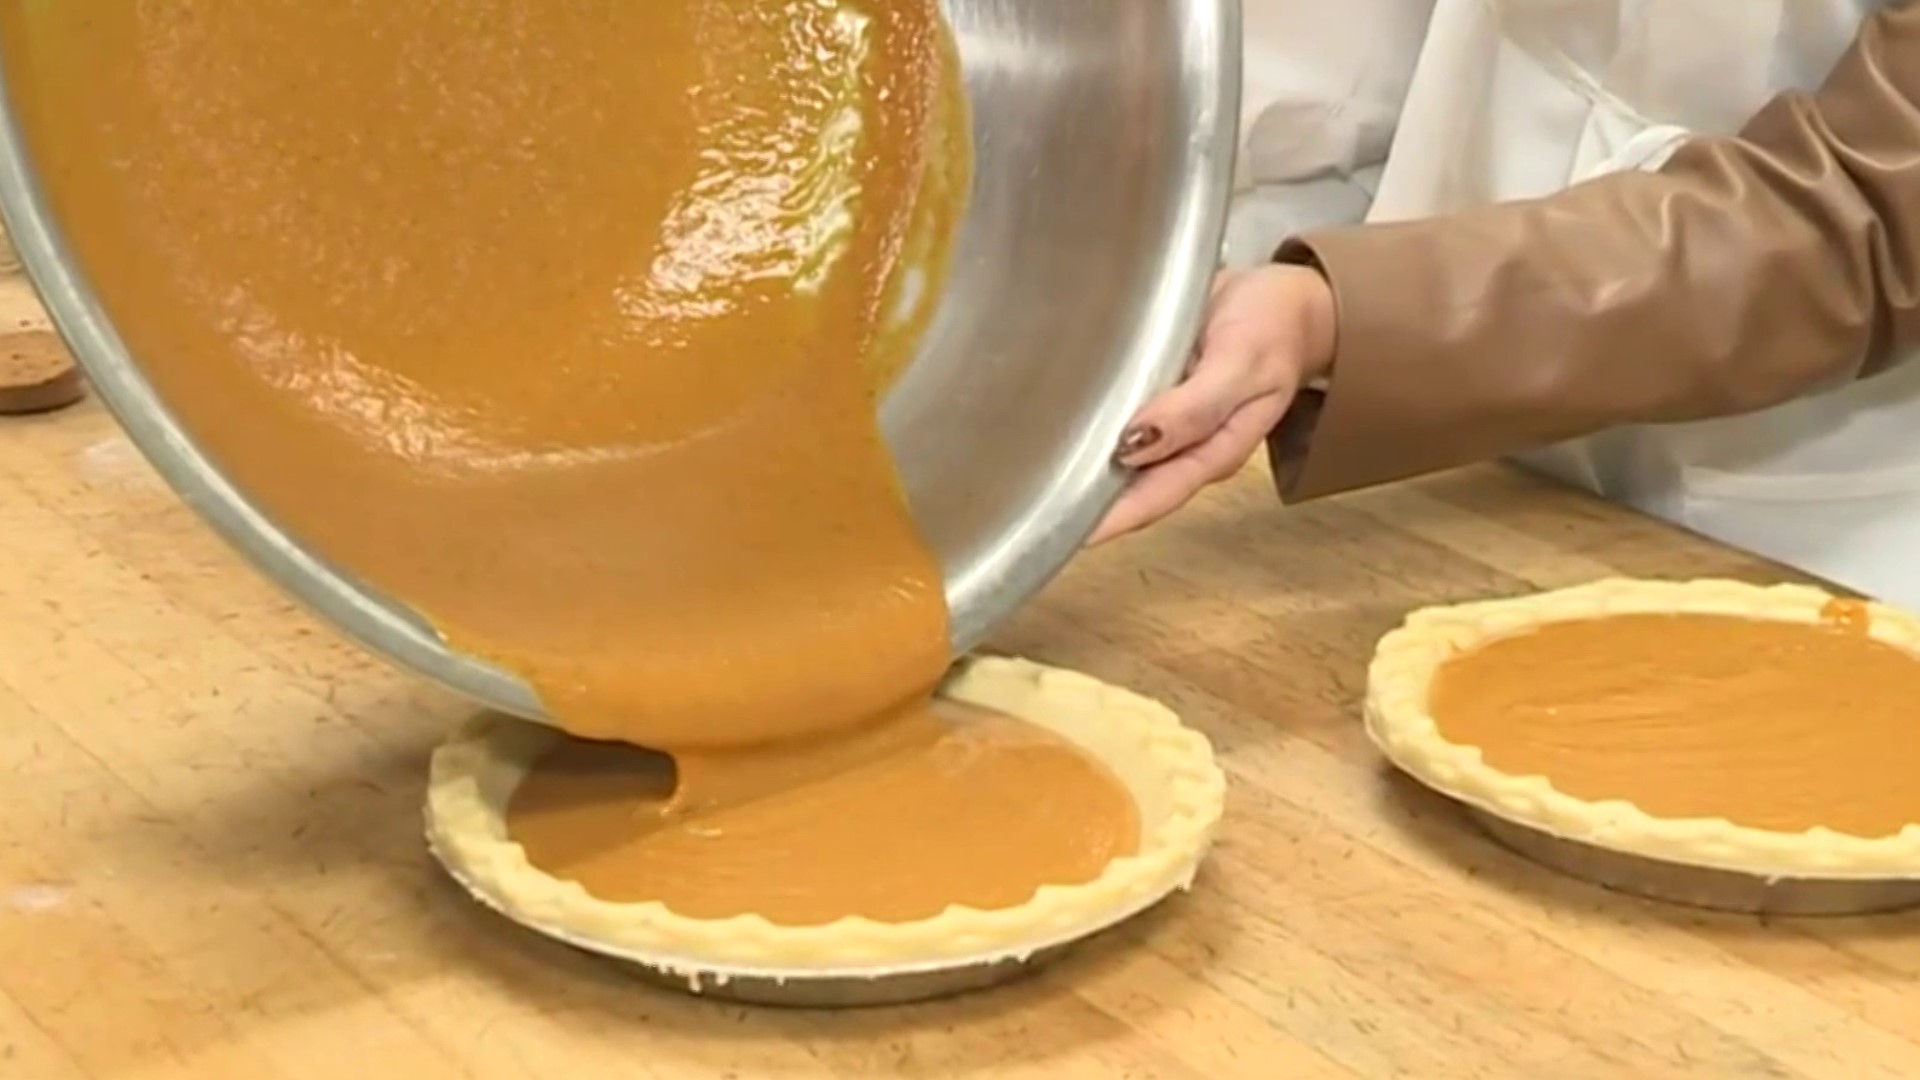 We reached out to a local expert to share their tips on how to make the perfect pumpkin pie ahead of Thanksgiving.